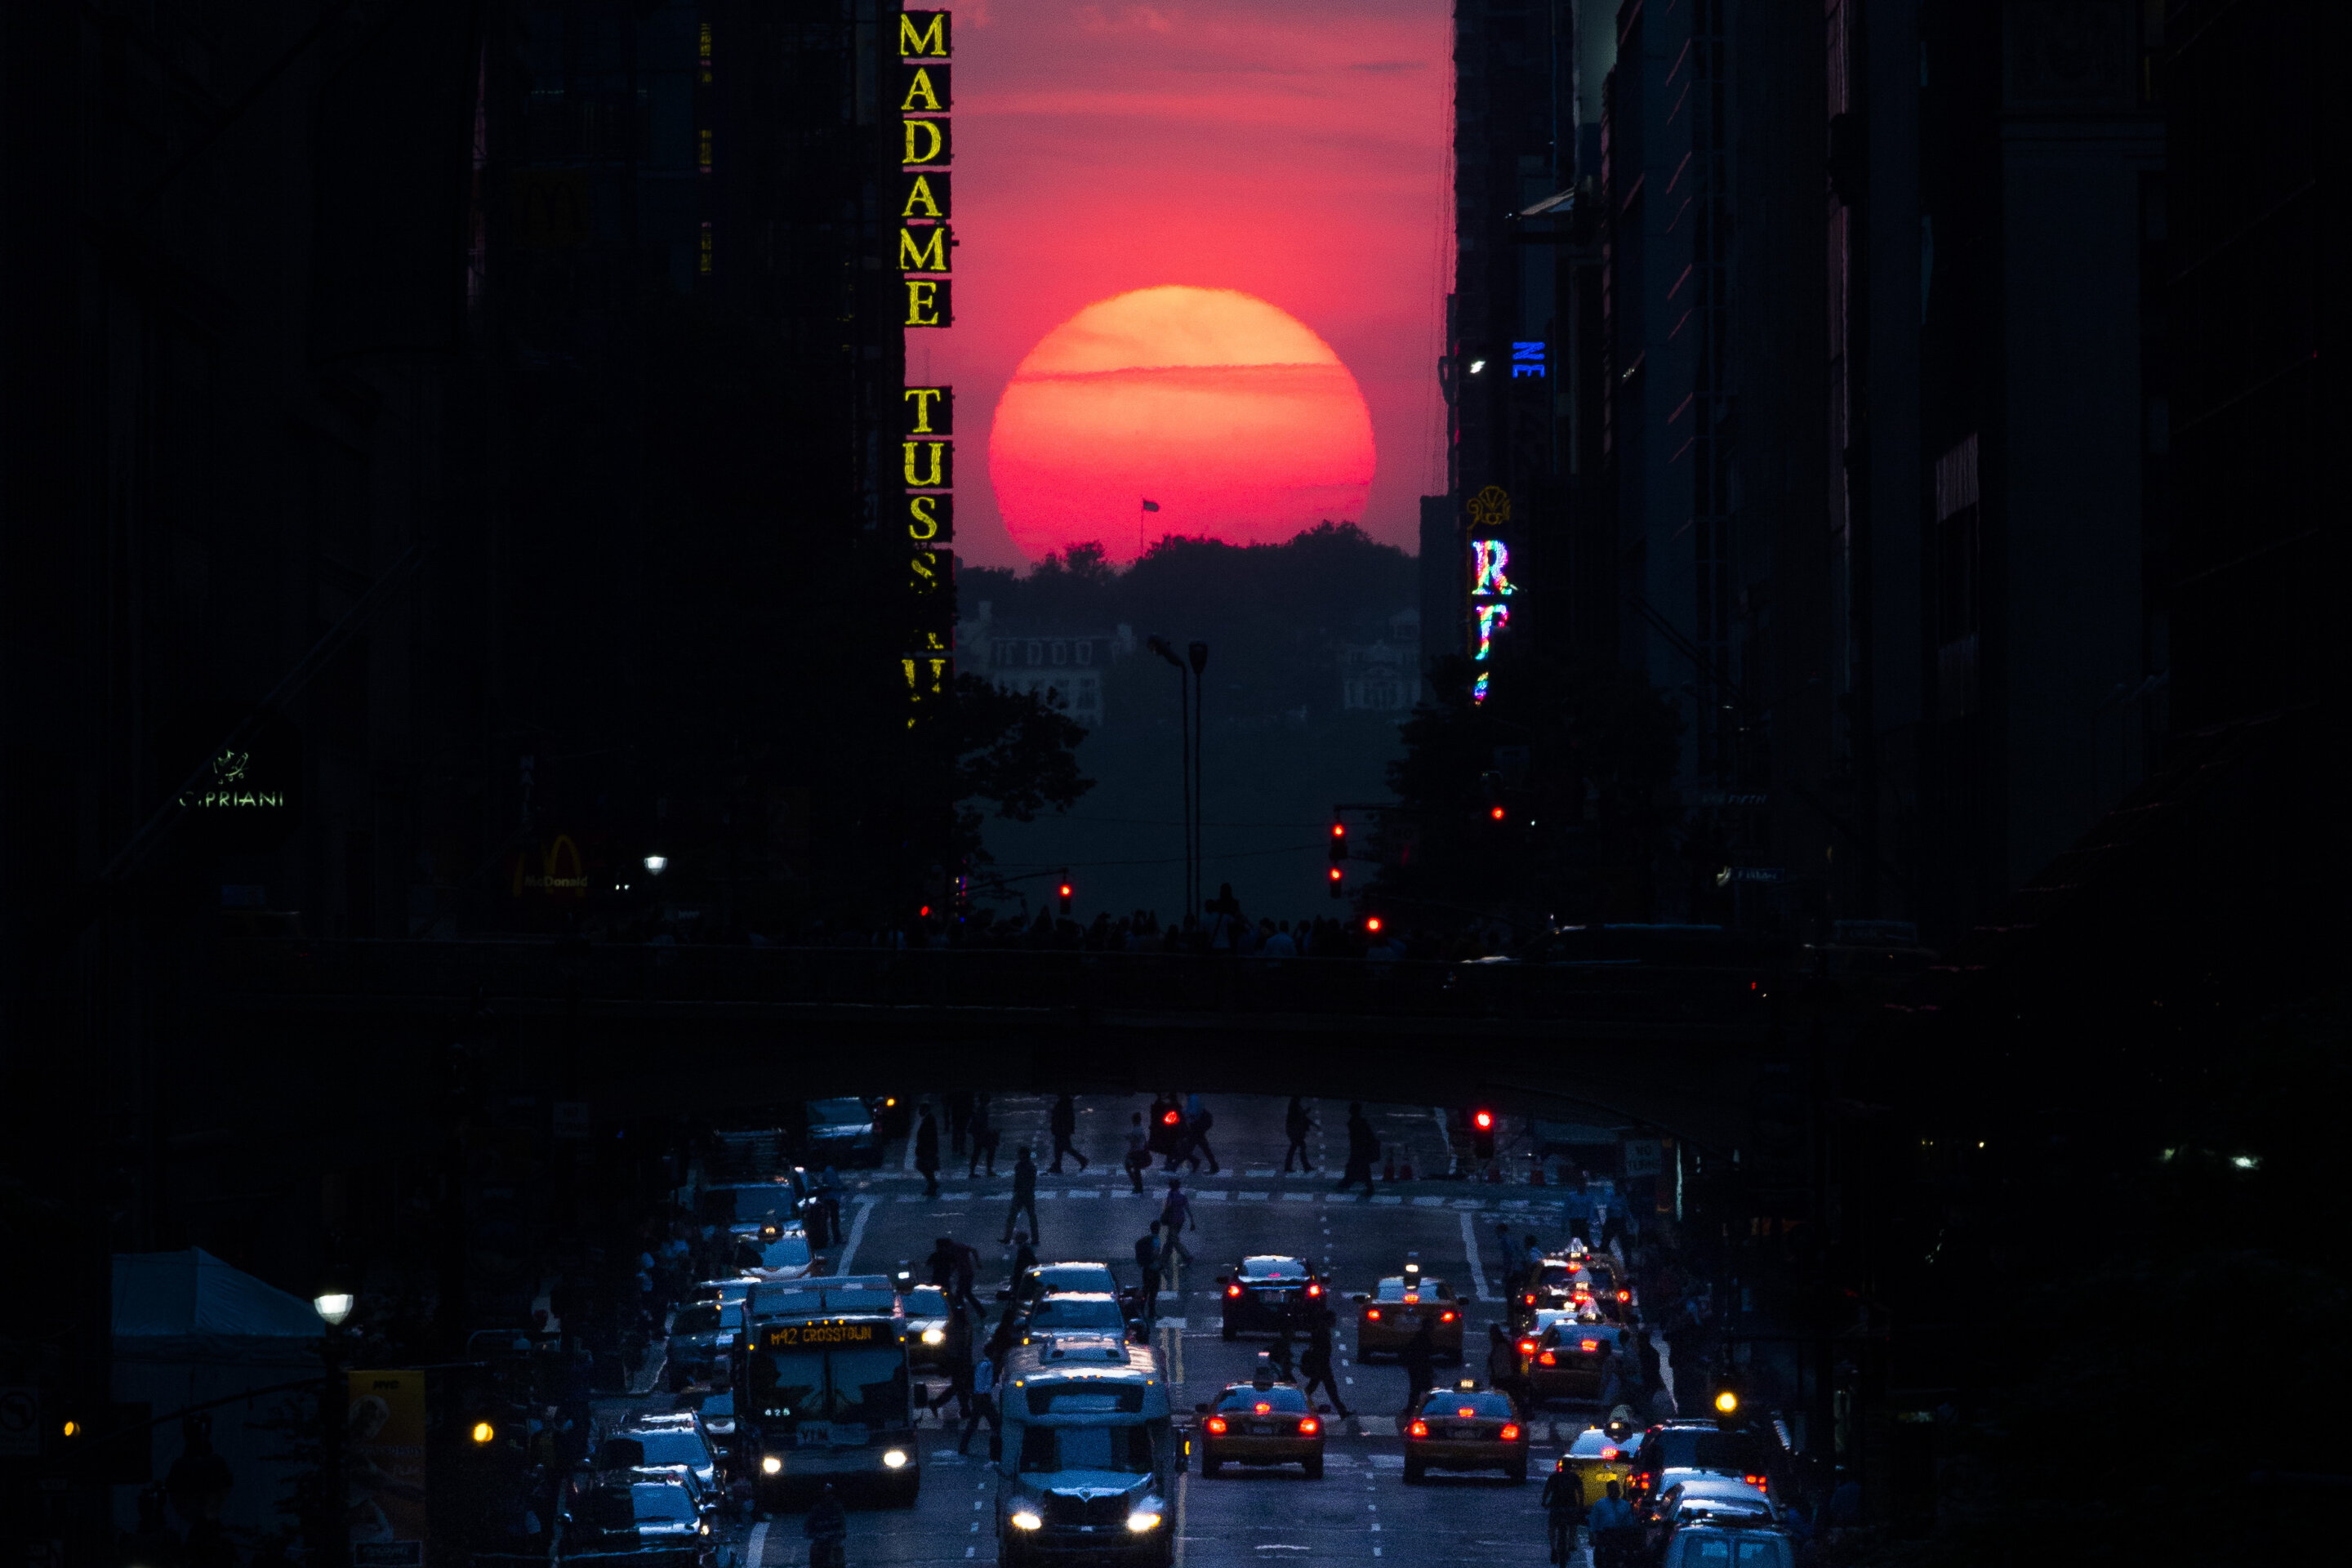 EXPLAINER When is Manhattanhenge? Where can you see it?